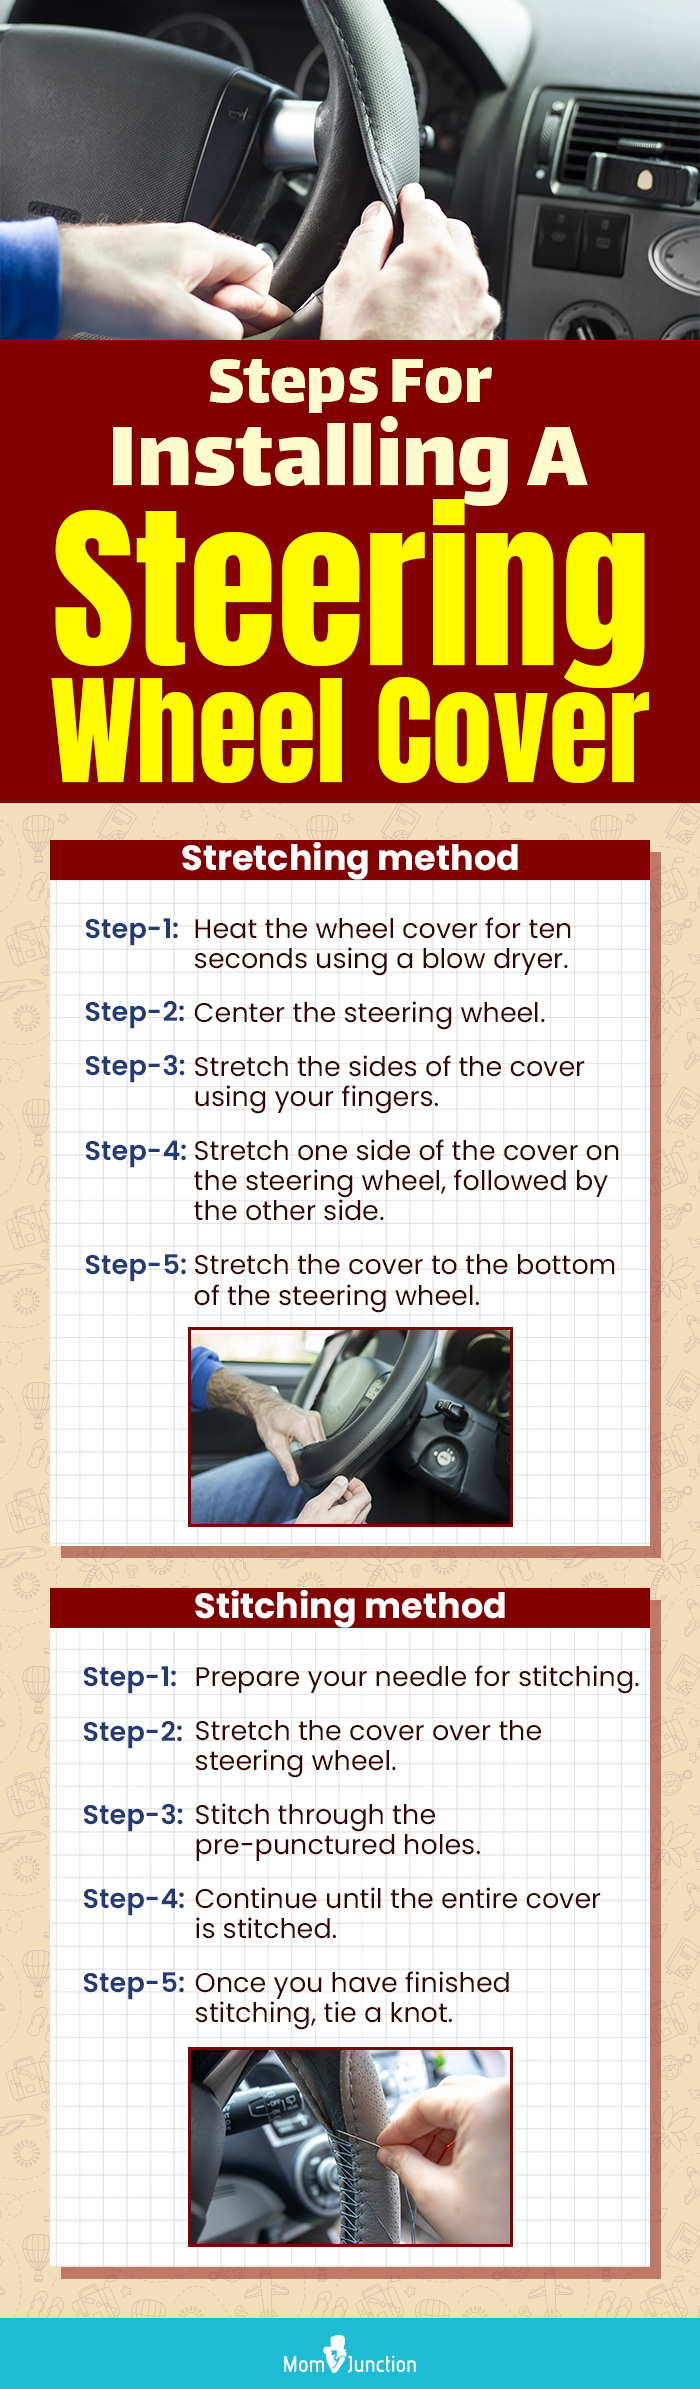 Steps For Installing A Steering Wheel Cover (infographic)